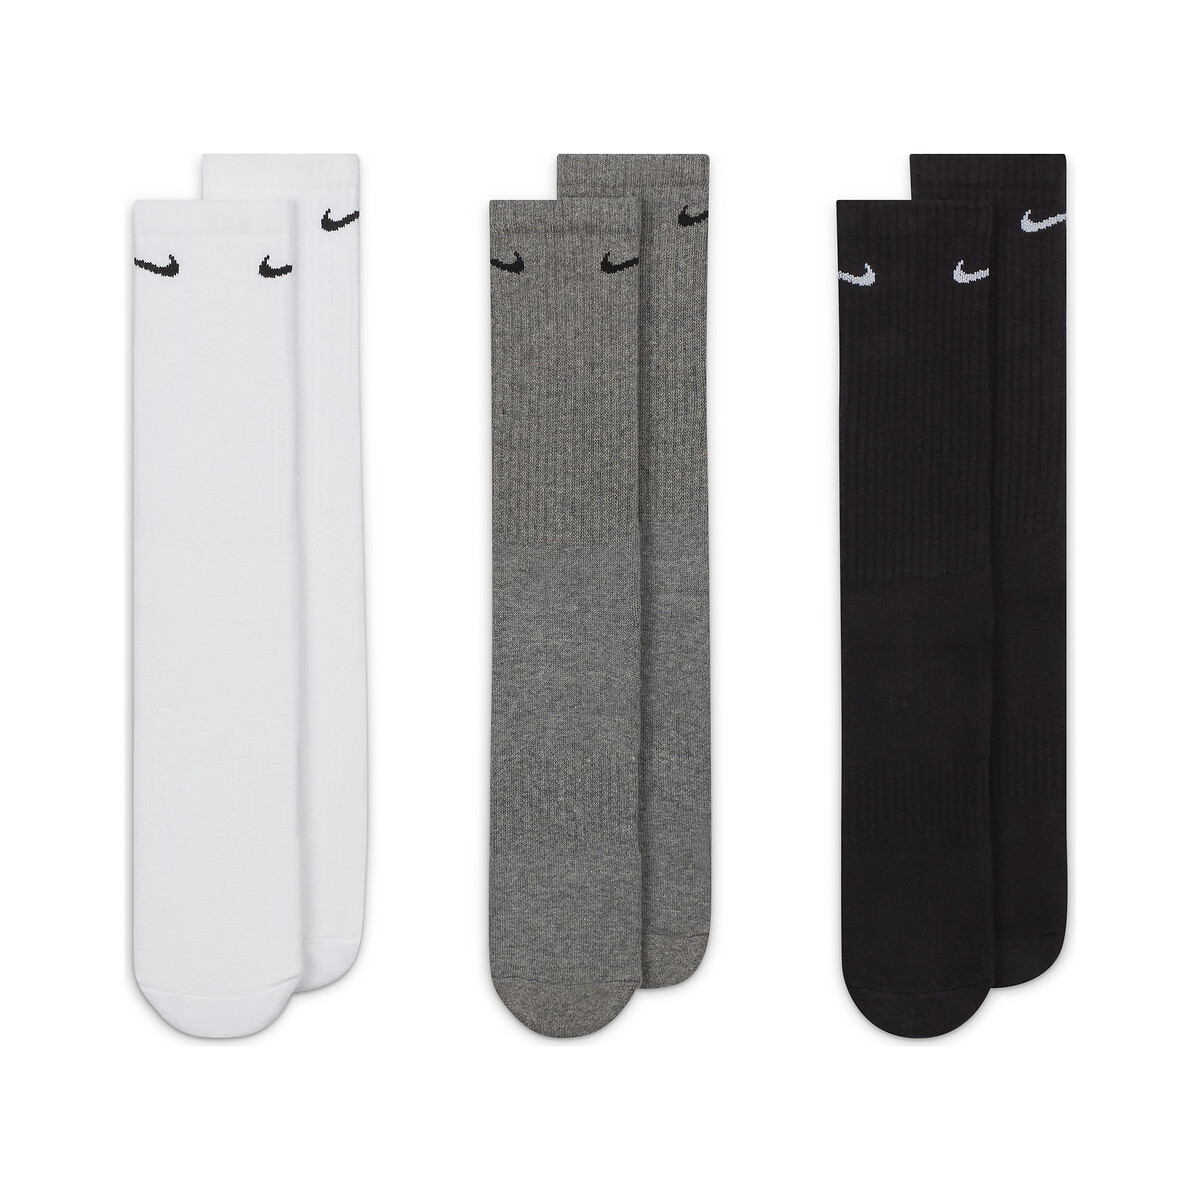 Pack of 3 pairs of knee-high socks in cotton mix , white, Nike | La Redoute